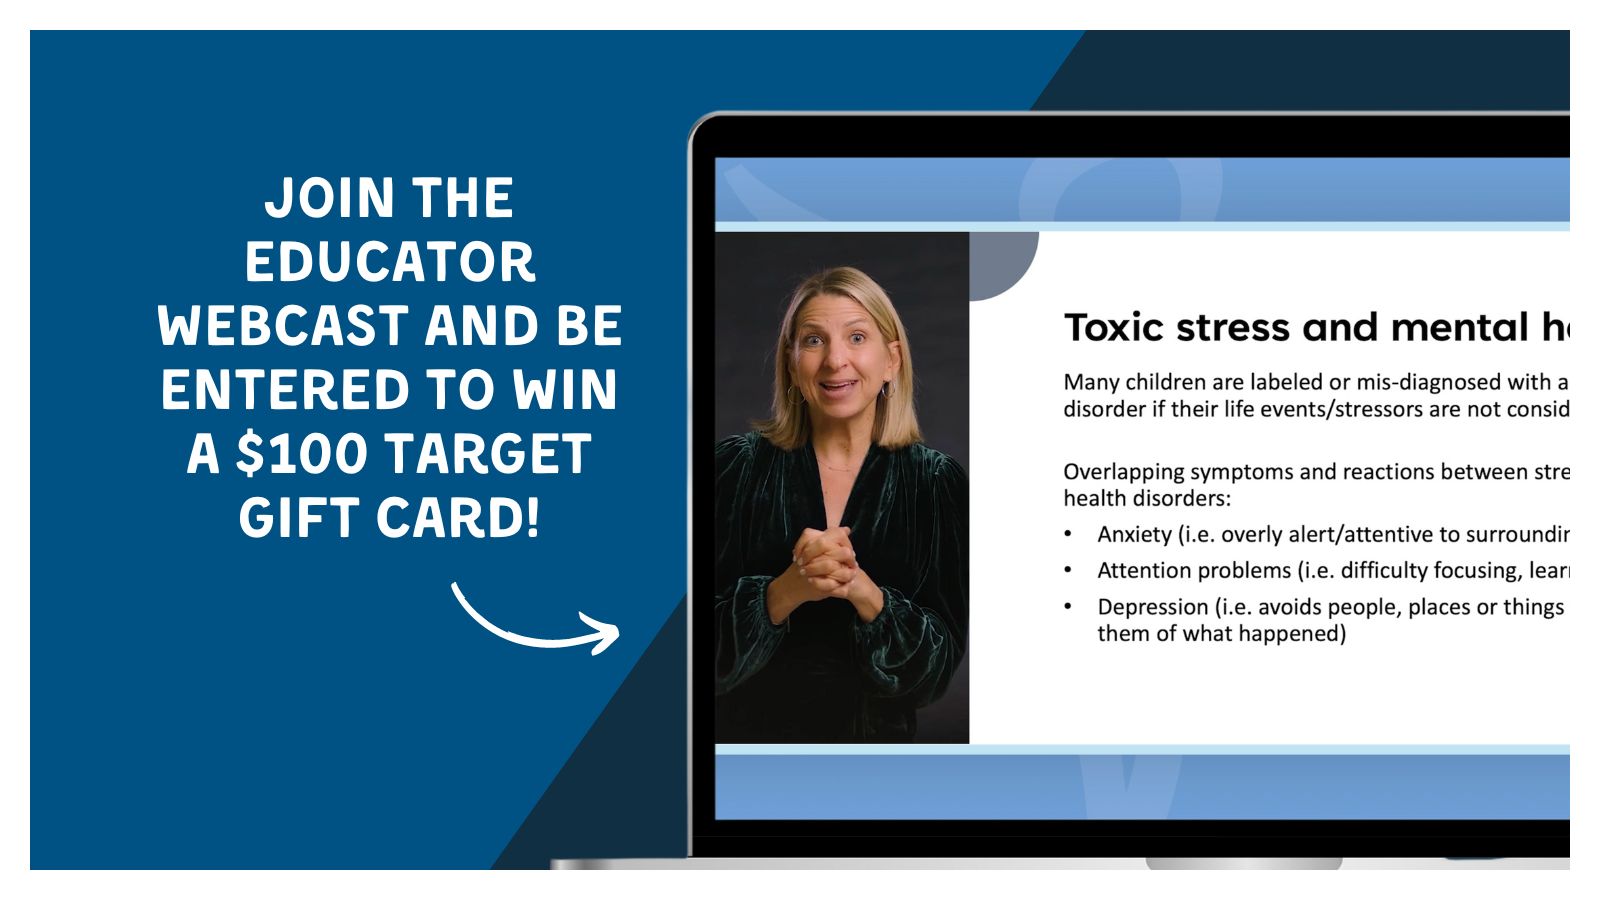 Join the educator webcast and be entered to win a Target gift card.